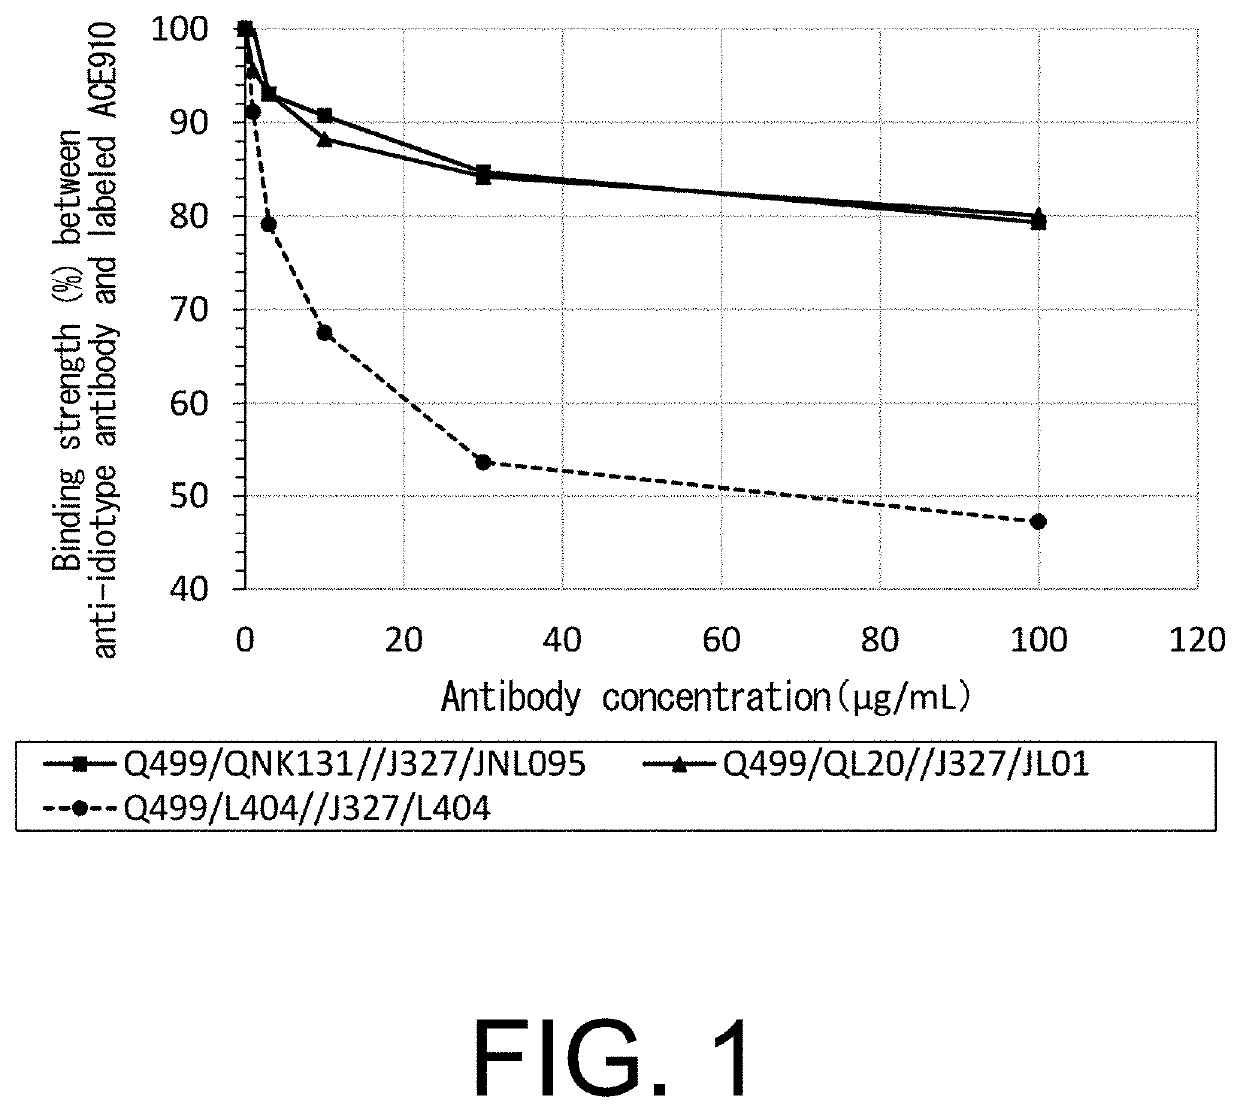 Multispecific antigen-binding molecules having blood coagulation factor viii (FVIII) cofactor function-substituting activity and pharmaceutical formulations containing such a molecule as an active ingredient